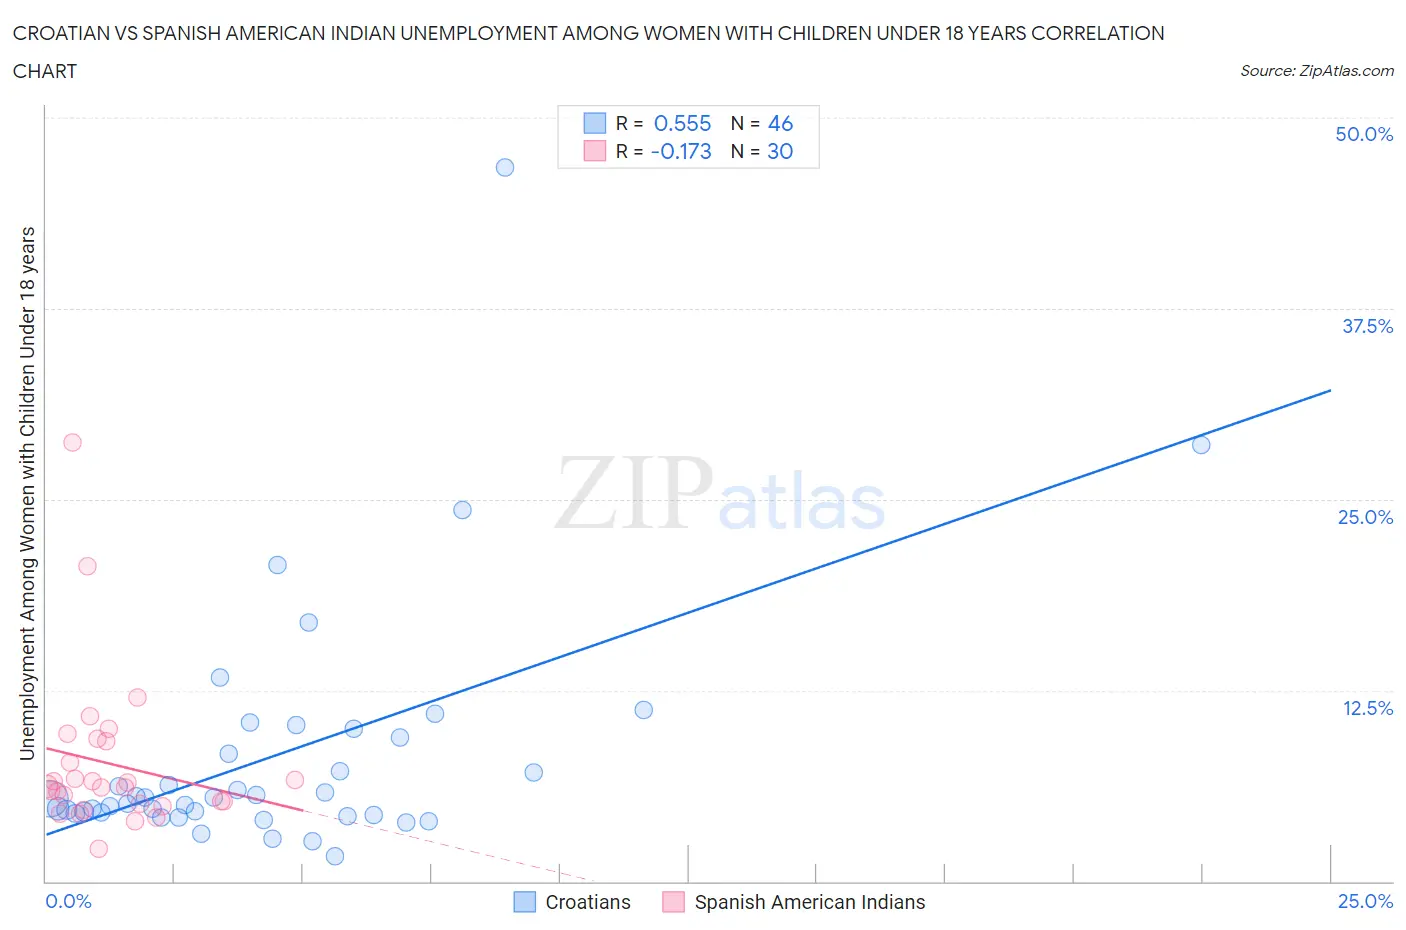 Croatian vs Spanish American Indian Unemployment Among Women with Children Under 18 years